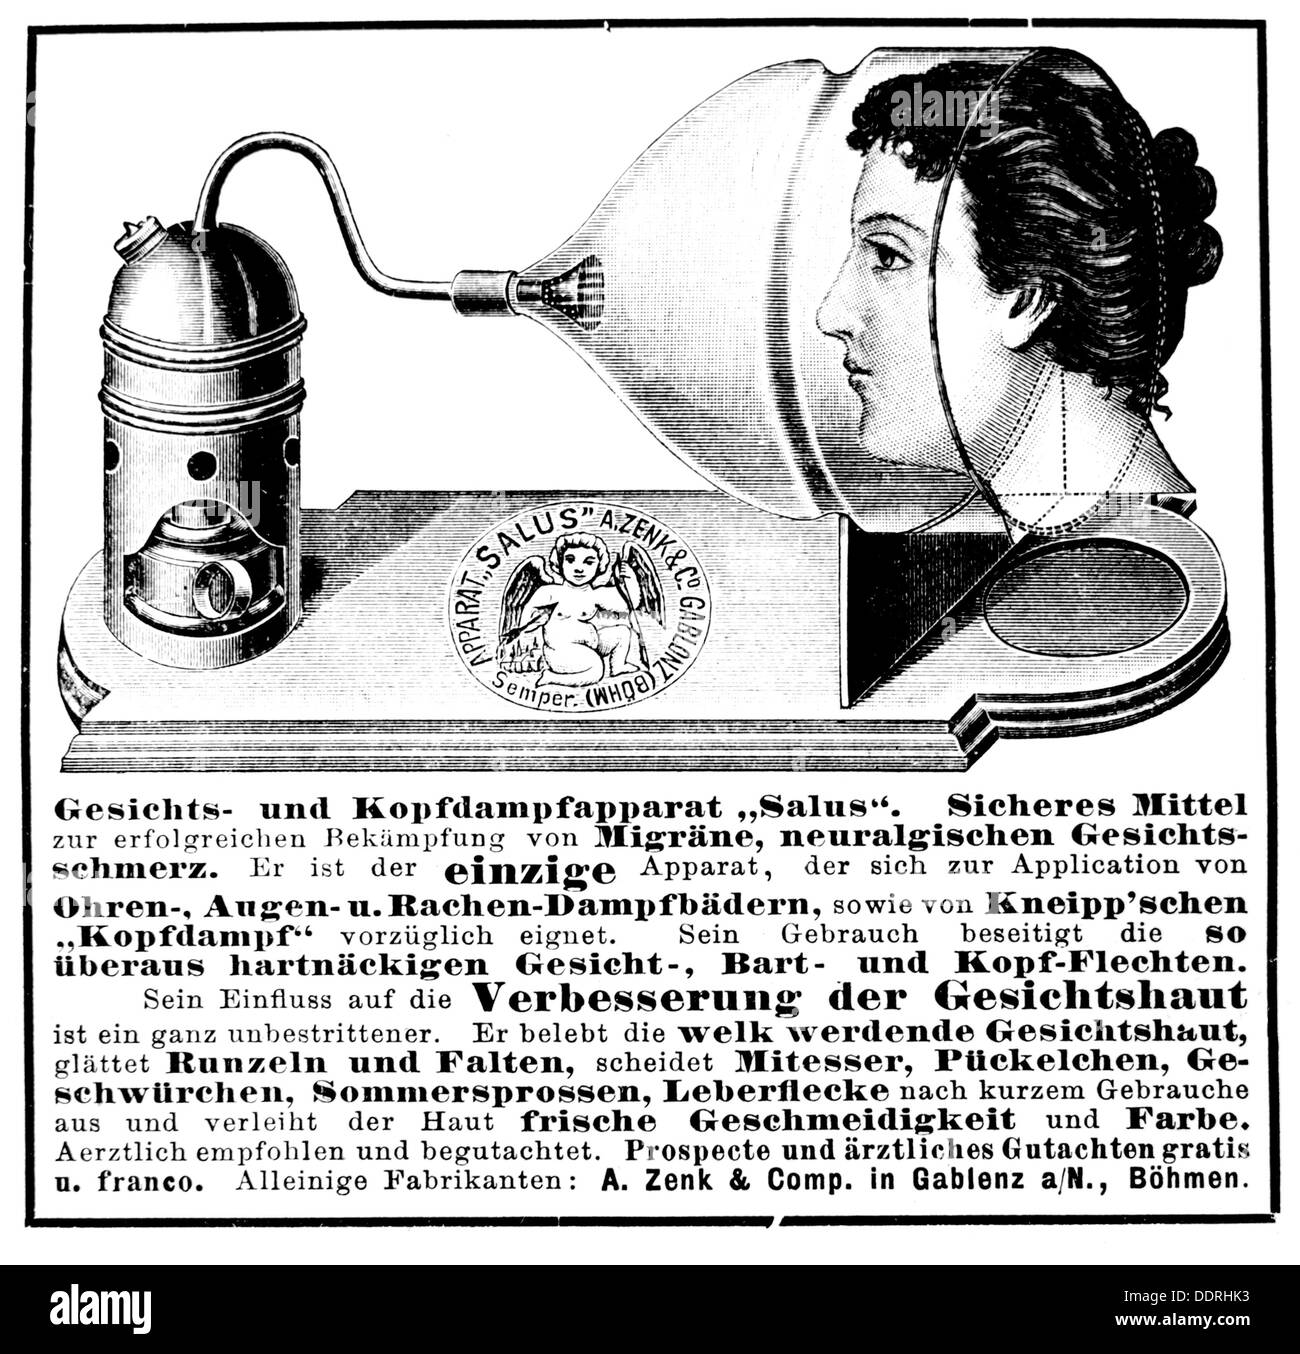 advertising, medicine, advertisement for steam apparatus 'Salus' against migraine, A.Zenk & Comp., Gablenz, Bohemia, wood engraving, from: 'Fuer alle Welt!', Stuttgart, 1897, Additional-Rights-Clearences-Not Available Stock Photo